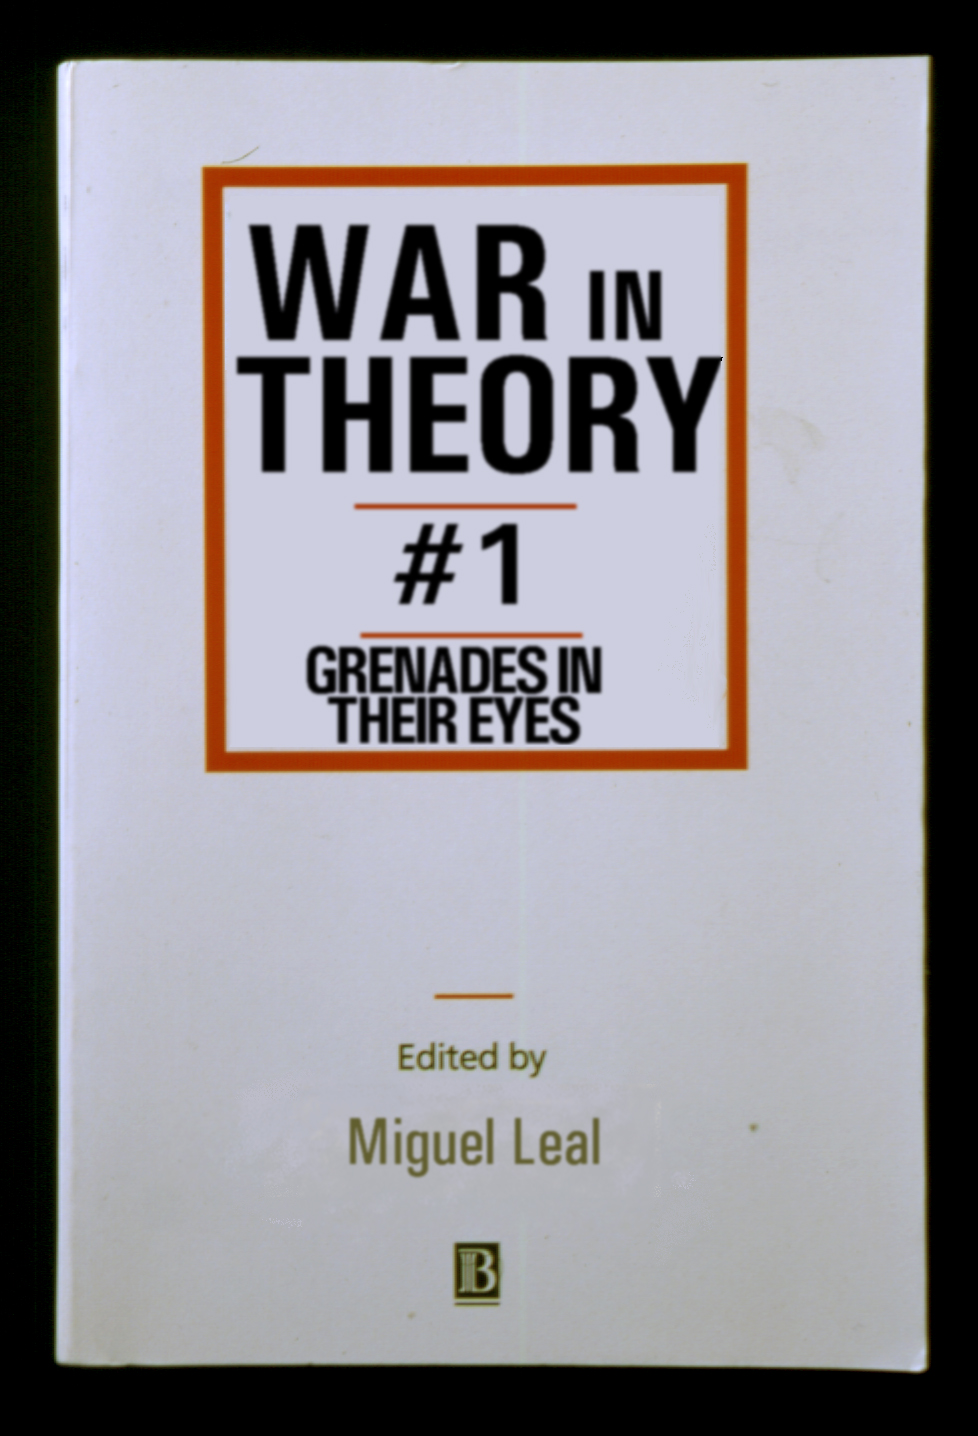 War in Theory — Bunker — An Anthology of unchanged ideas 34 pg; 21x14.5 cm. Edição em português| only portuguese Editor | Publisher: Museum of Modern Strategy, 1997.